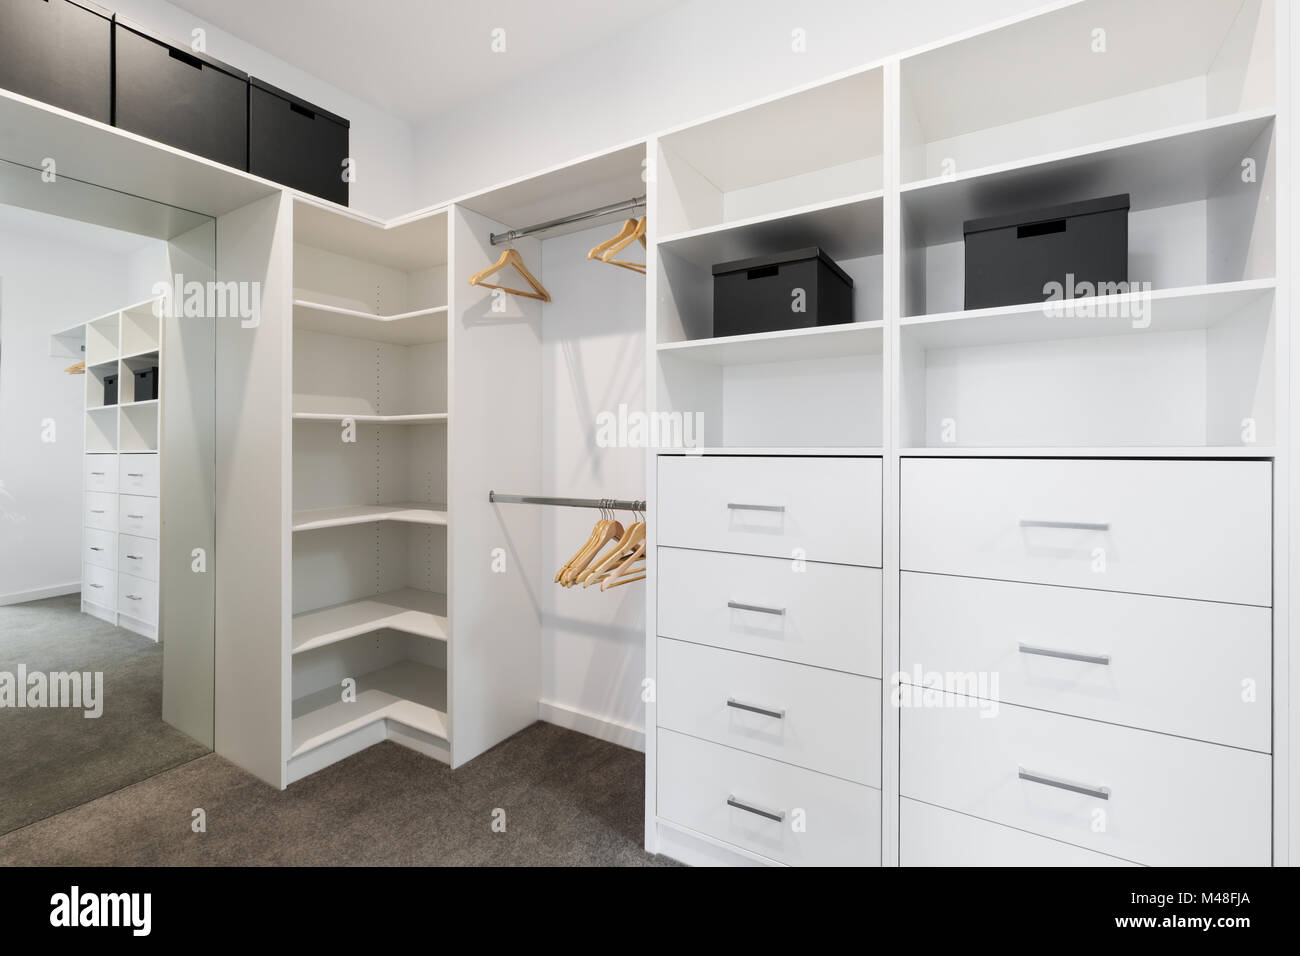 Large walk in wardrobe cabinetry detail in new home Stock Photo